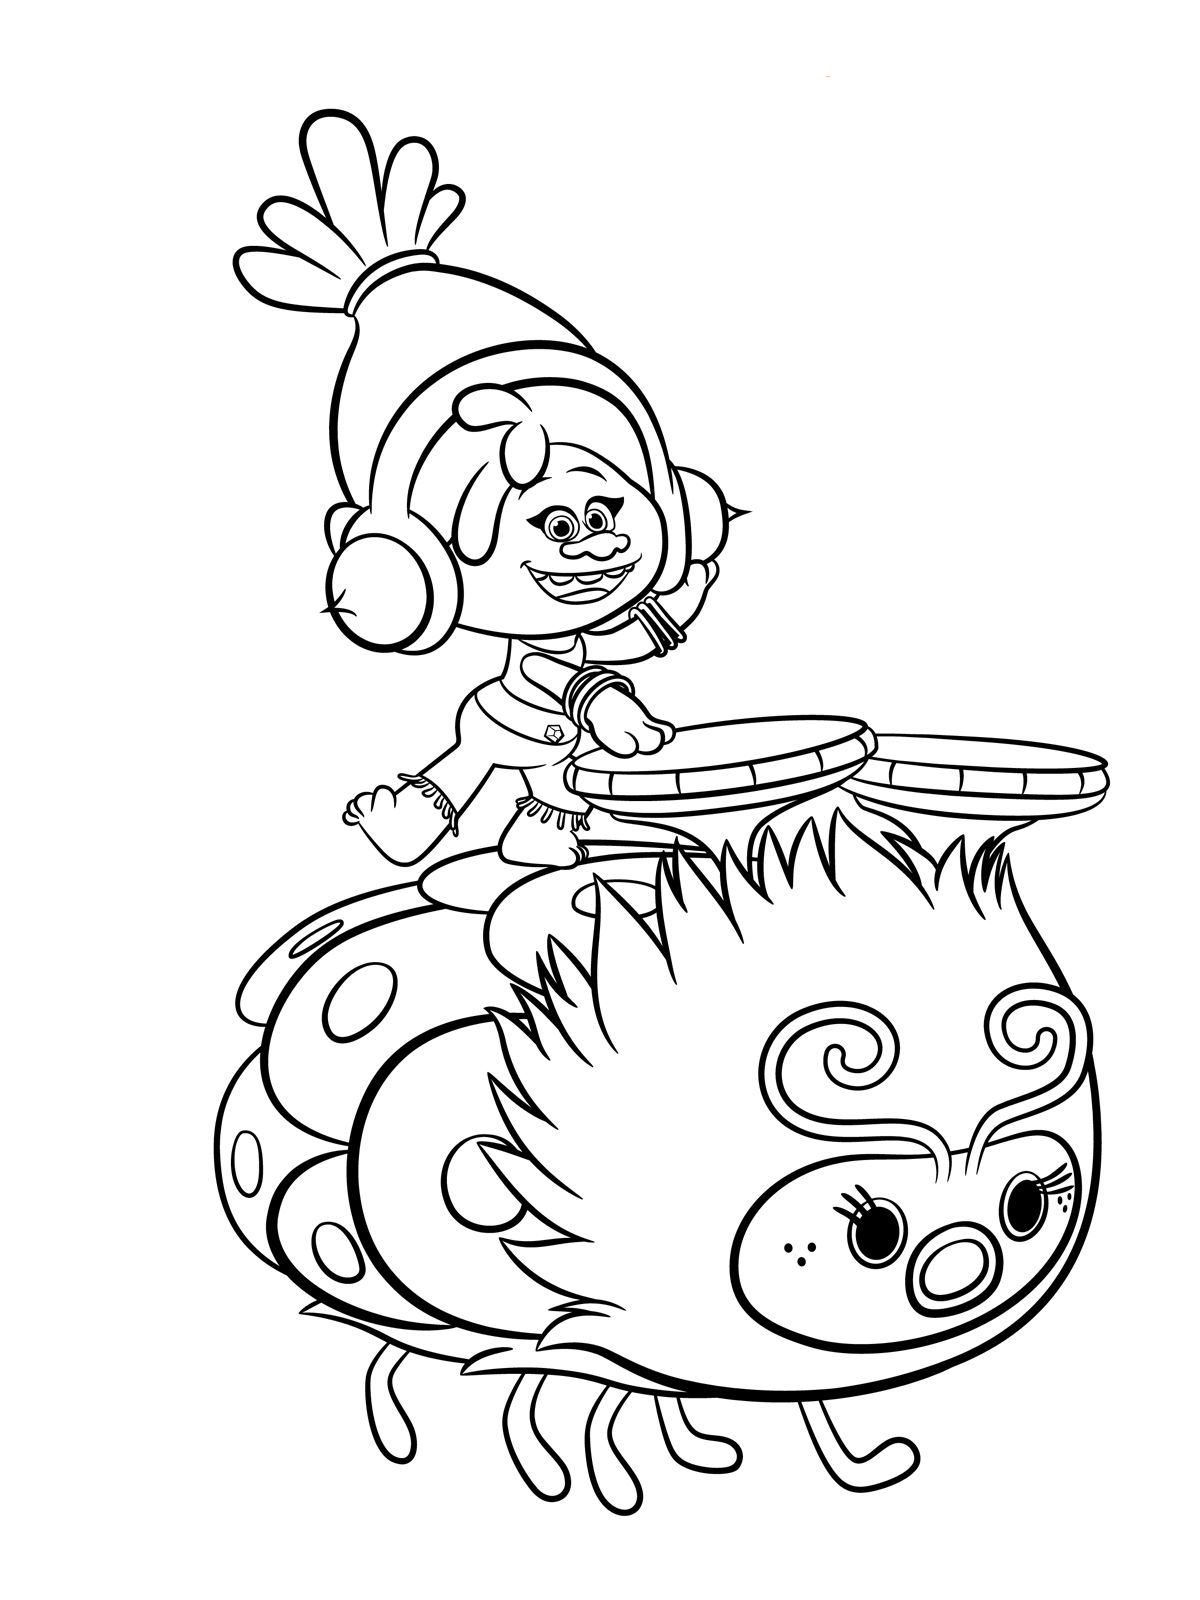 Trolls Coloring Pages To Download And Print For Free | Coloring The - Free Printable Troll Coloring Pages